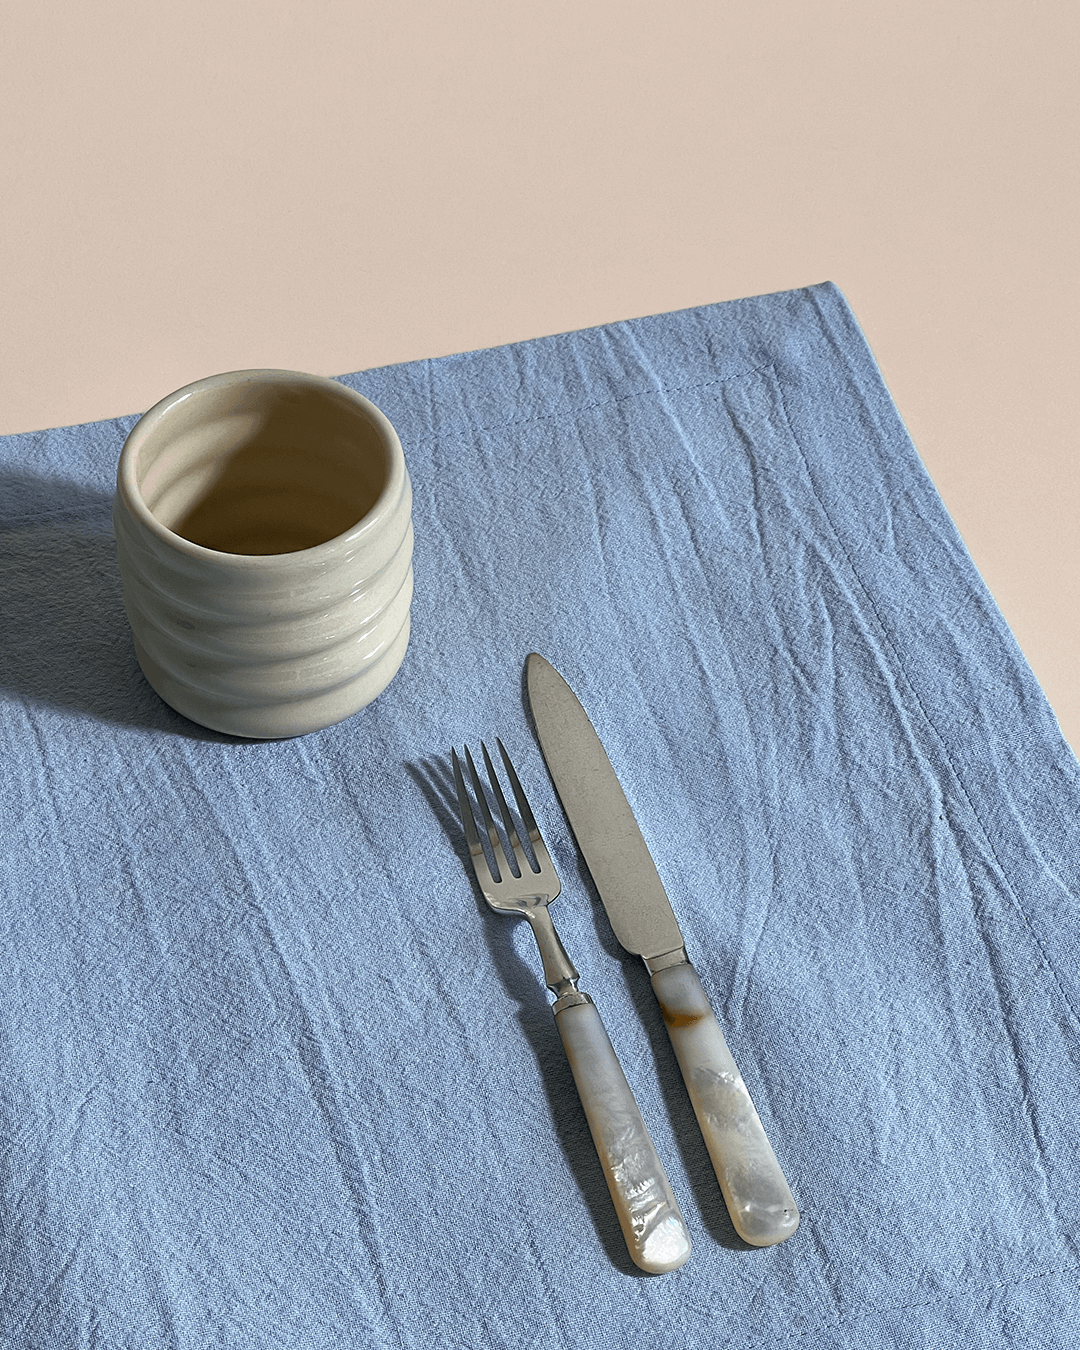 This cotton placemat comes in a set of 4 and ideally covers your dinner table. The whole tableware collection by Arles Studio is inspired by the idea of setting a fine table and sharing a meal with friends and family. The products are dyed by hand, keeping its natural texture and feel. The fabrics are made from 100% cotton and the soft and creamy pastel colors are spot on.  Our tip: mix and match with the Arles Studio napkins and tablecloths.